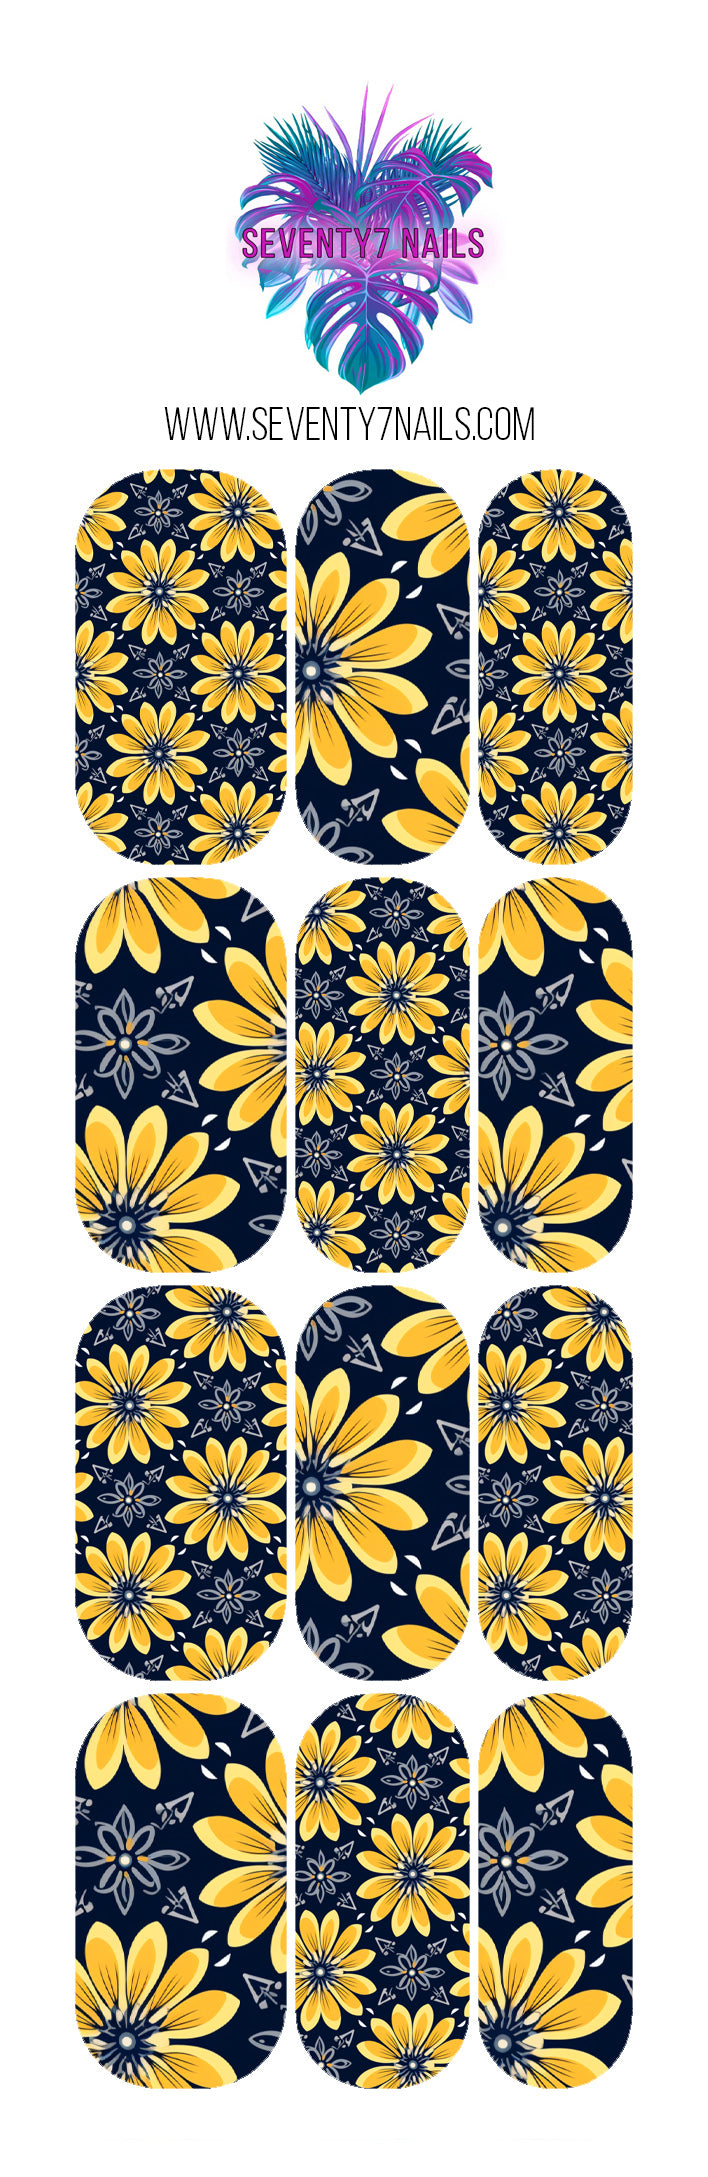 Waterslide Nail Decals - Navy & Gold Daisies